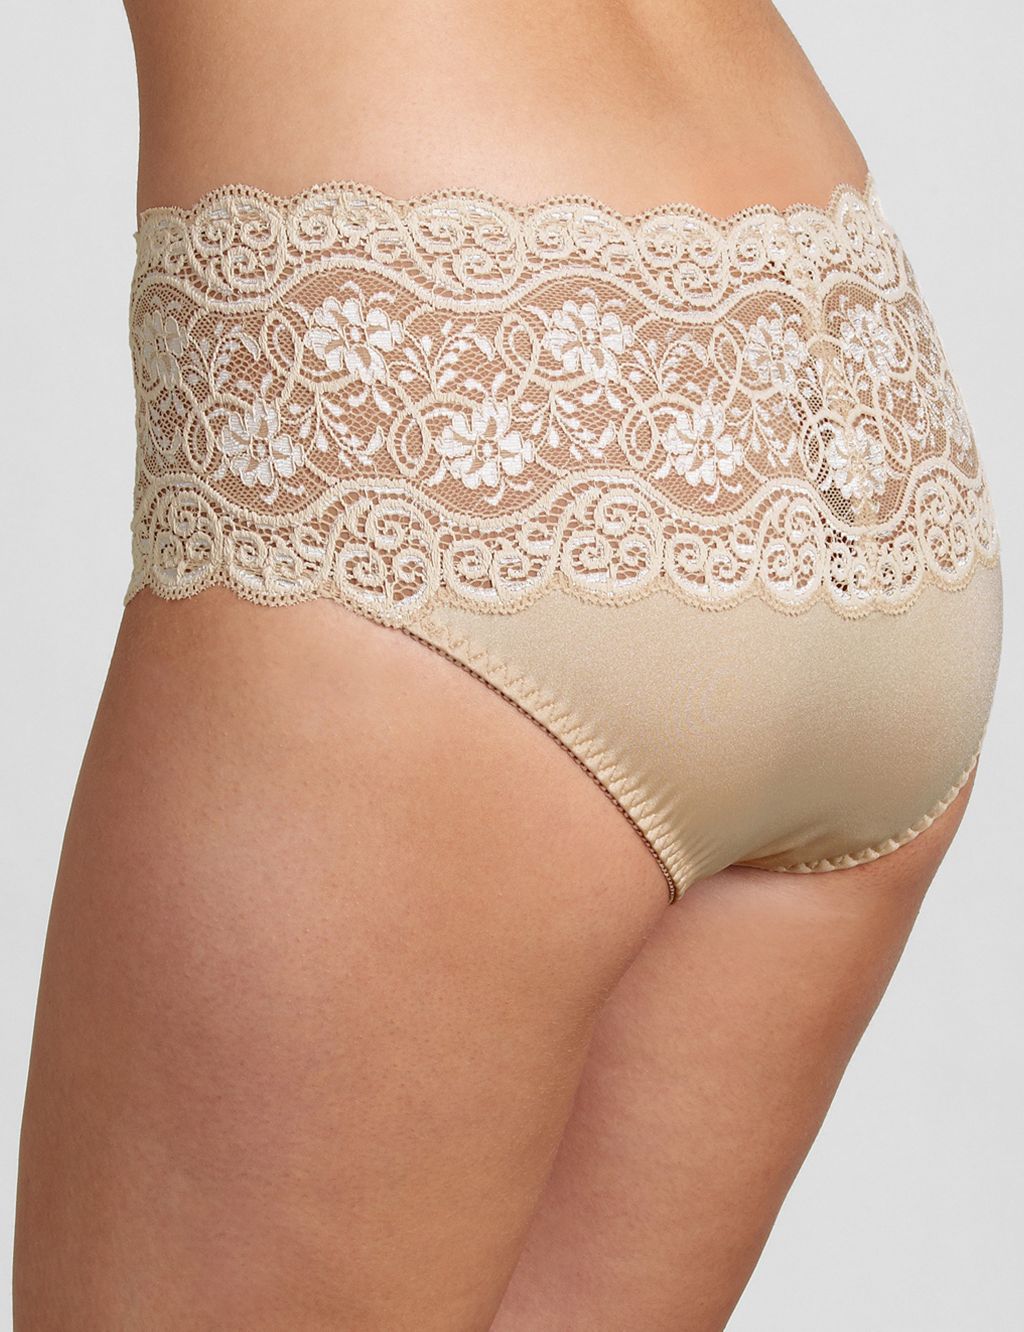 Amourette 300 All Over Lace Full Briefs image 3